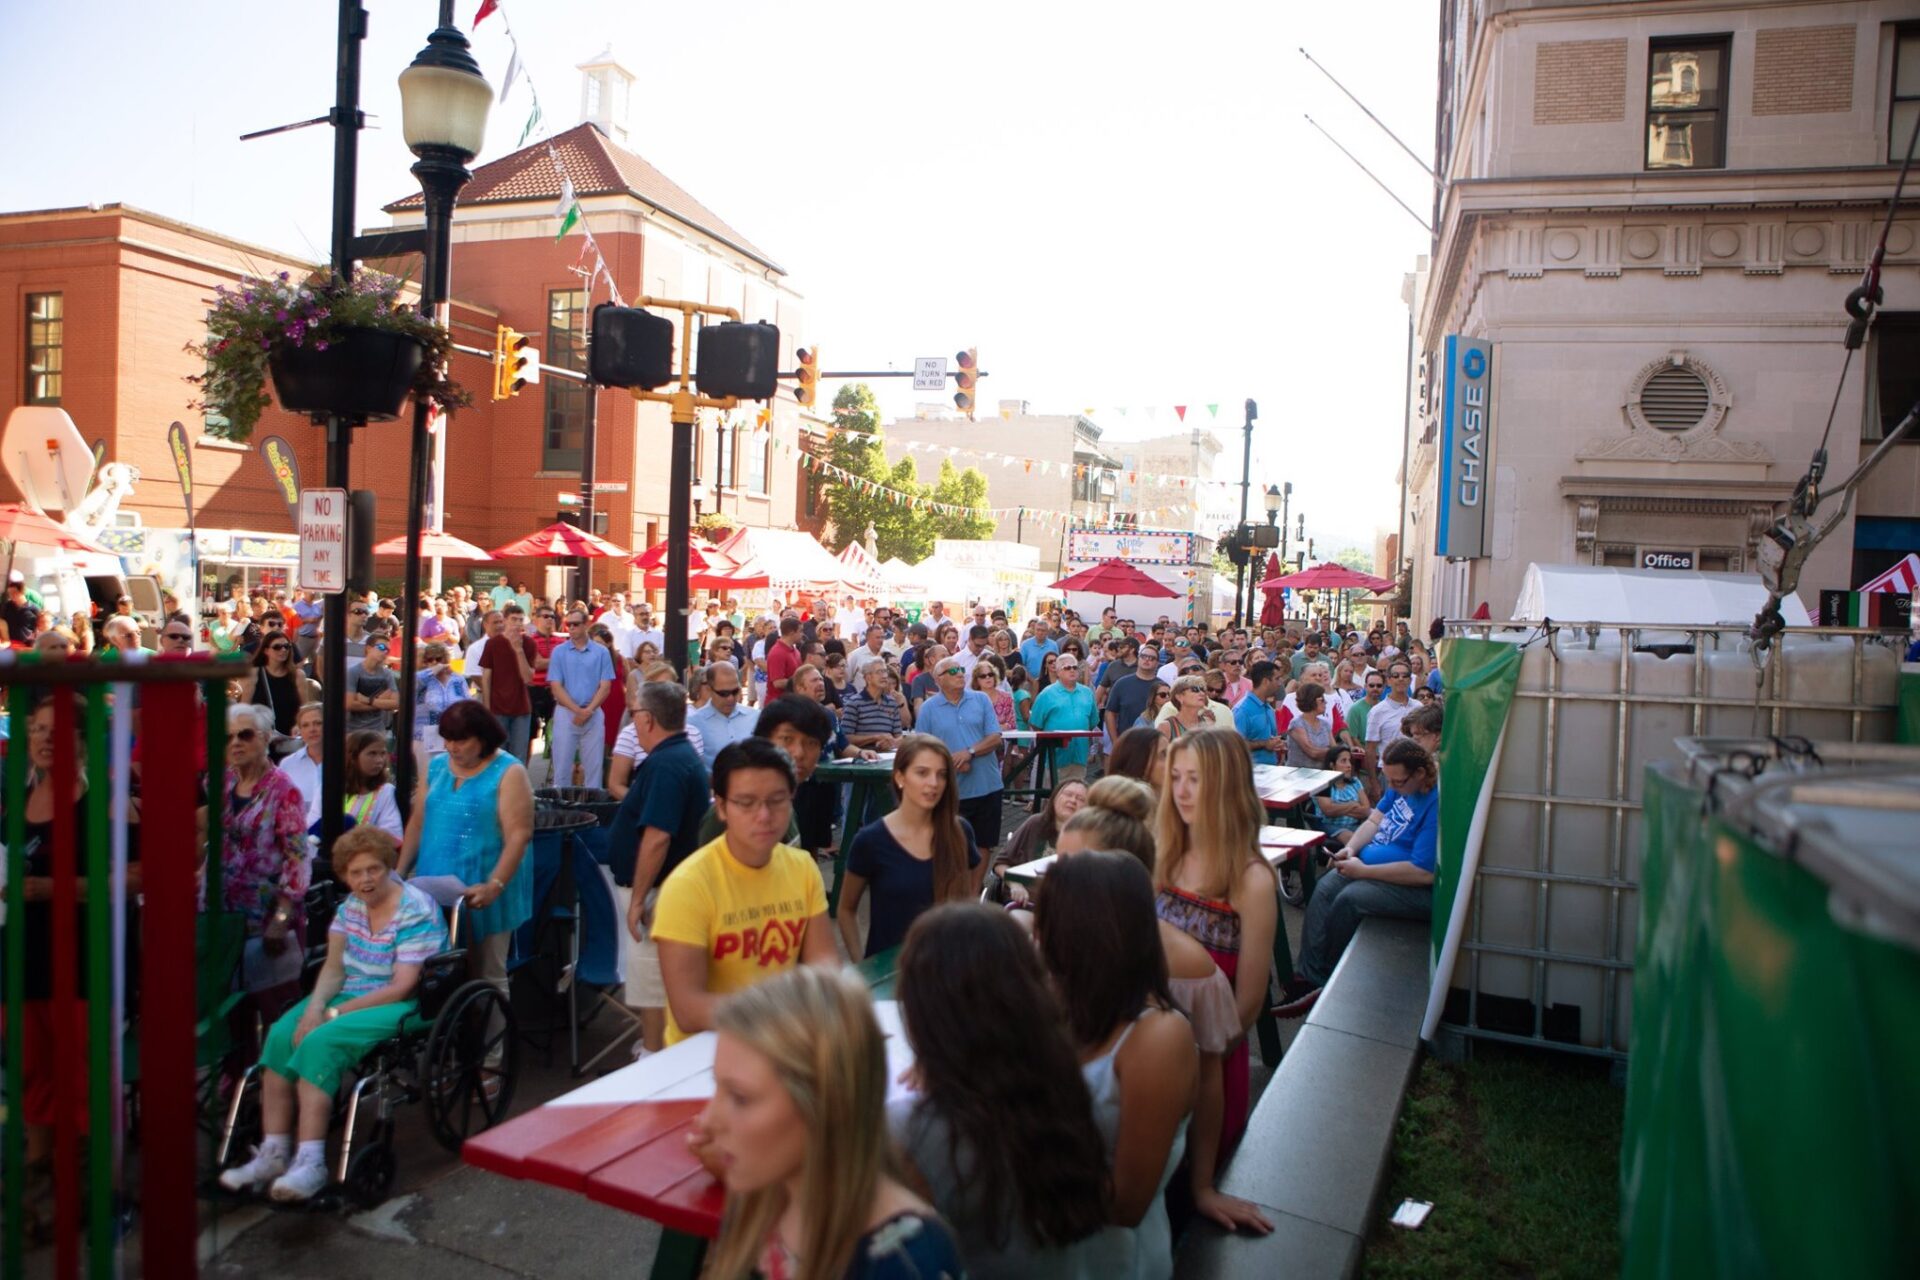 A crowd of people in a Clarksburg street for a festival.